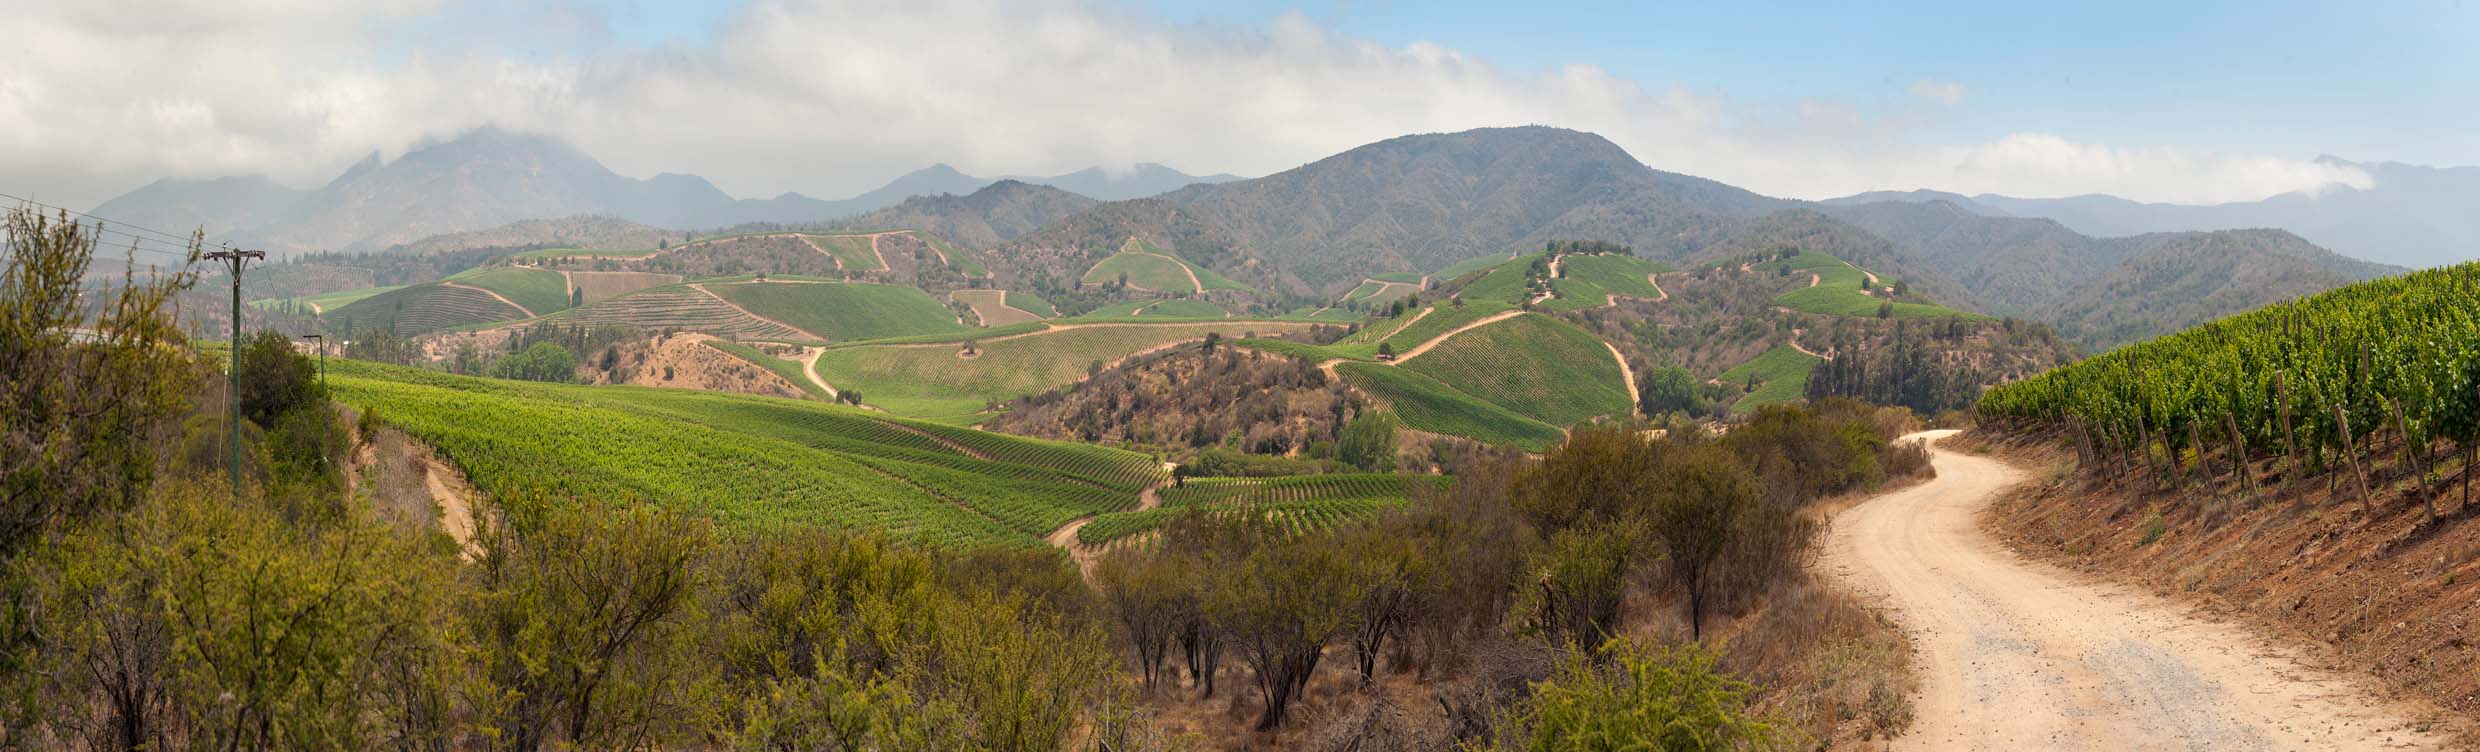 Vineyards clinging to a range of differing height hills from foreground to background, mountains in the far distance. Scrubland and a dirt track in the close foreground.